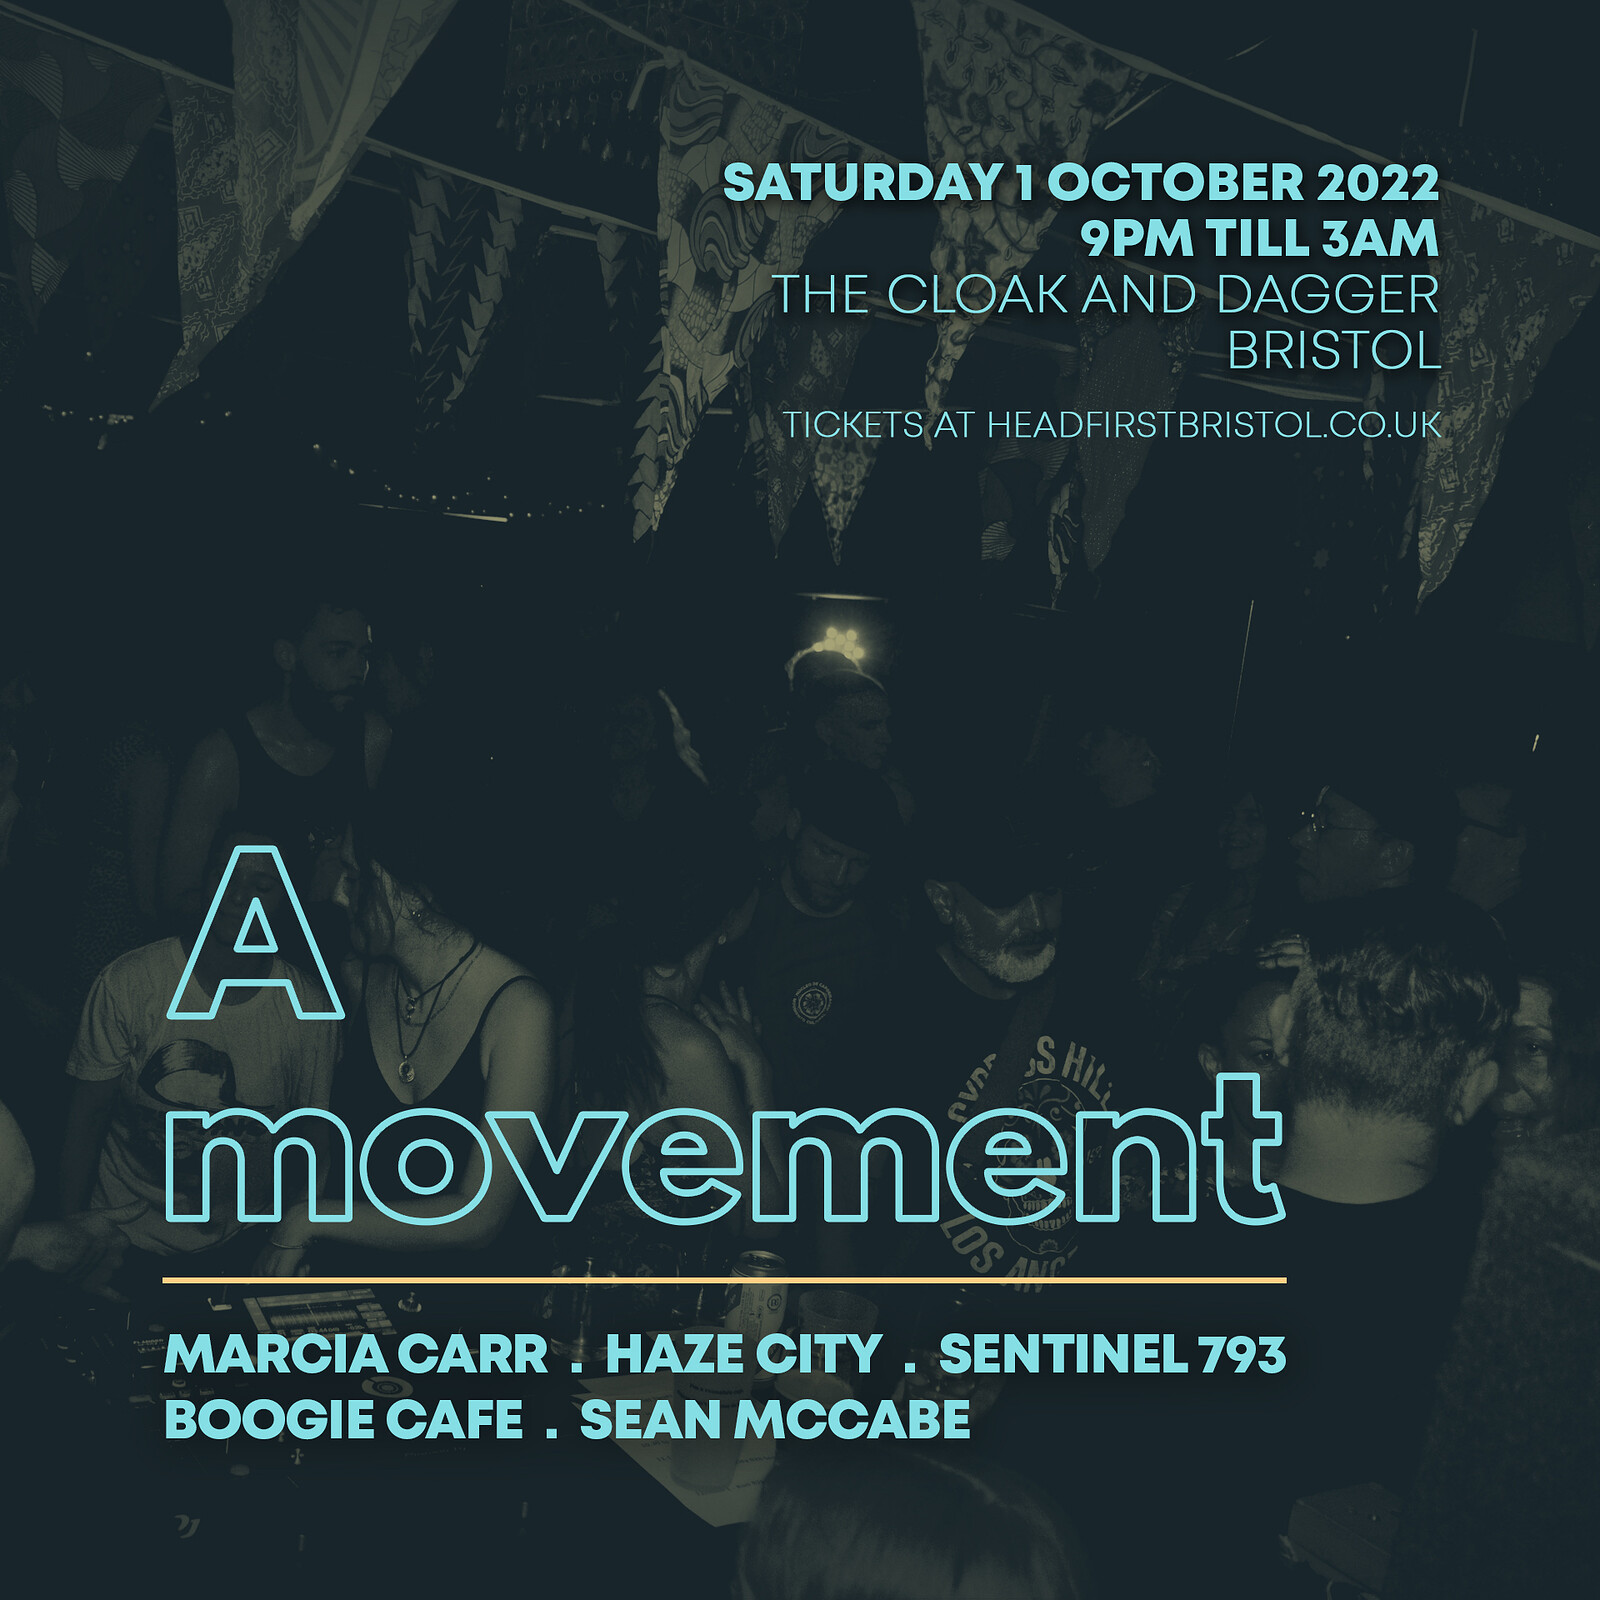 A Movement with Marcia Carr at The Cloak and Dagger